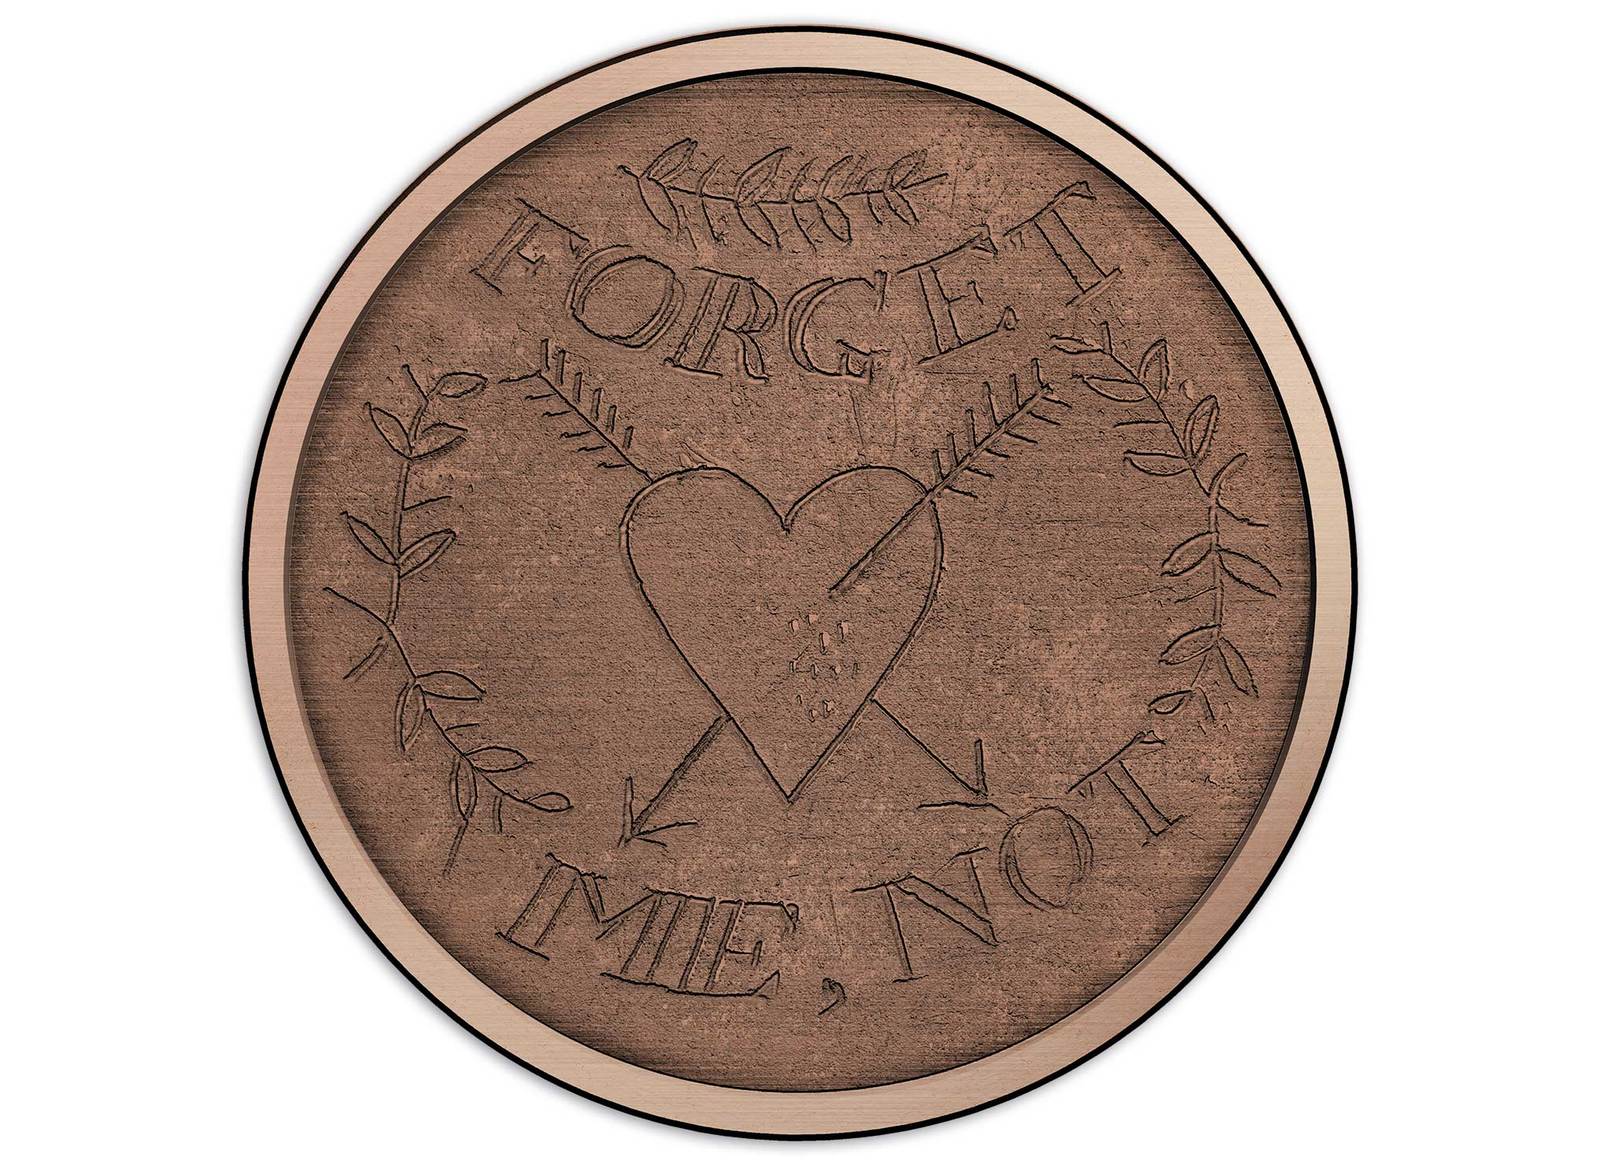 2016 Convict Love Tokens Set of 3 Copper Coins